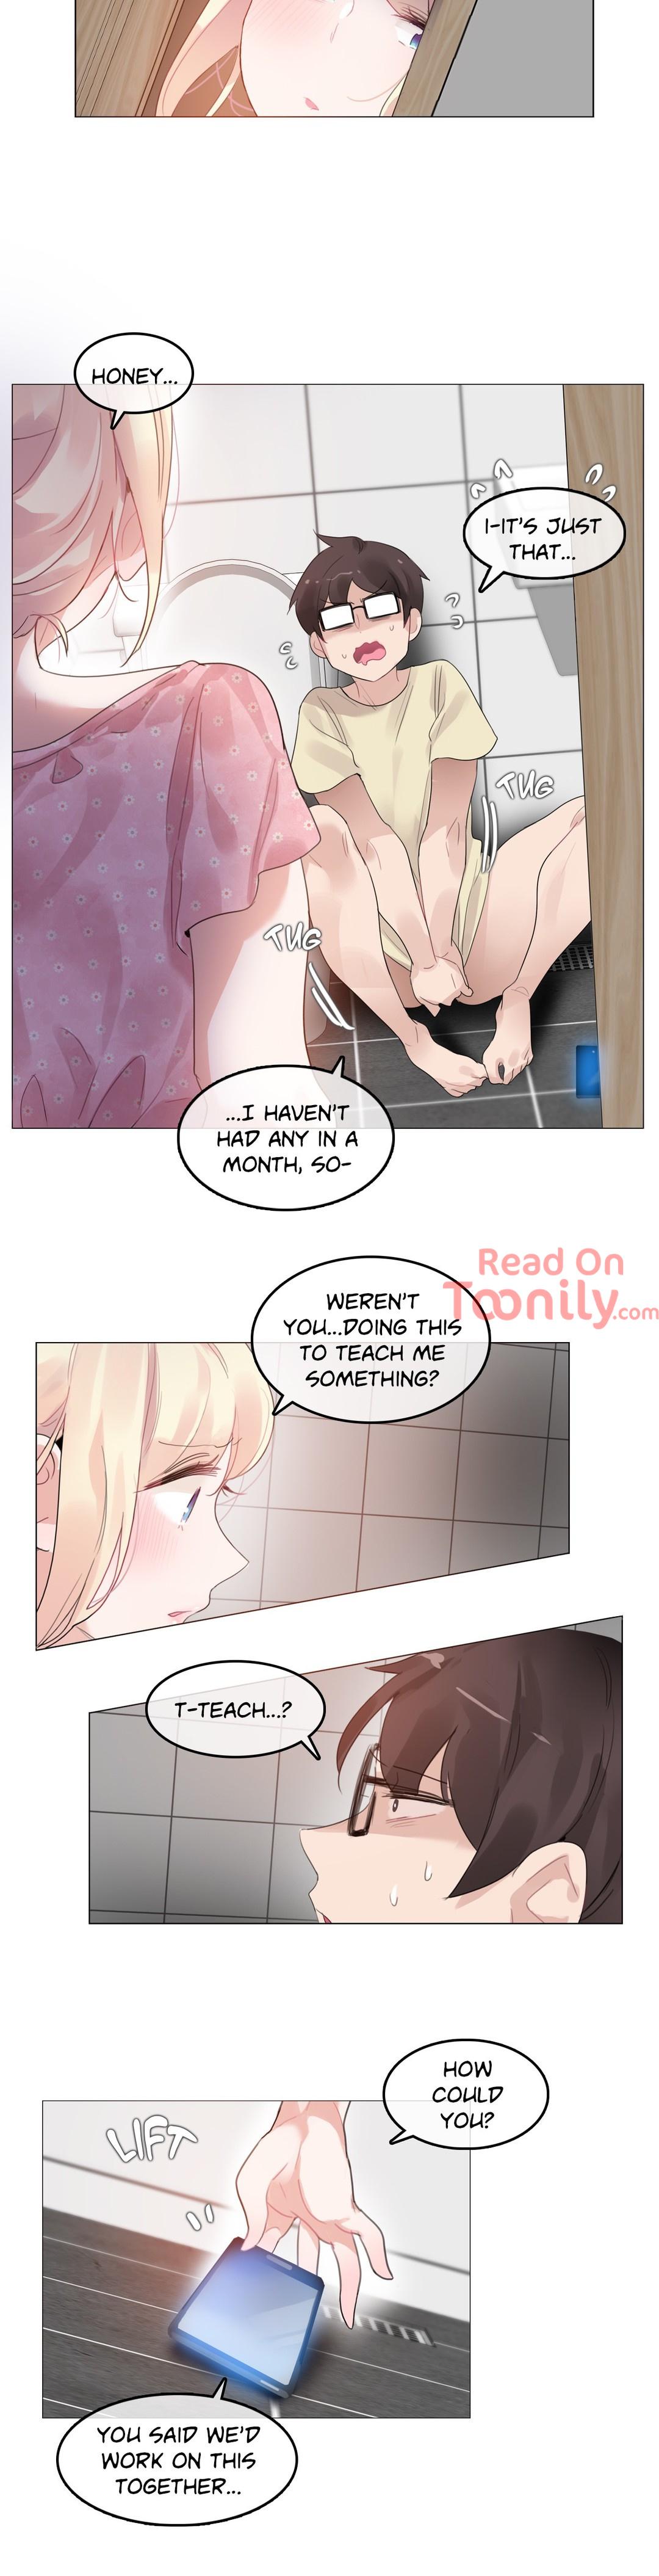 A Pervert's Daily Life • Chapter 66-70 68